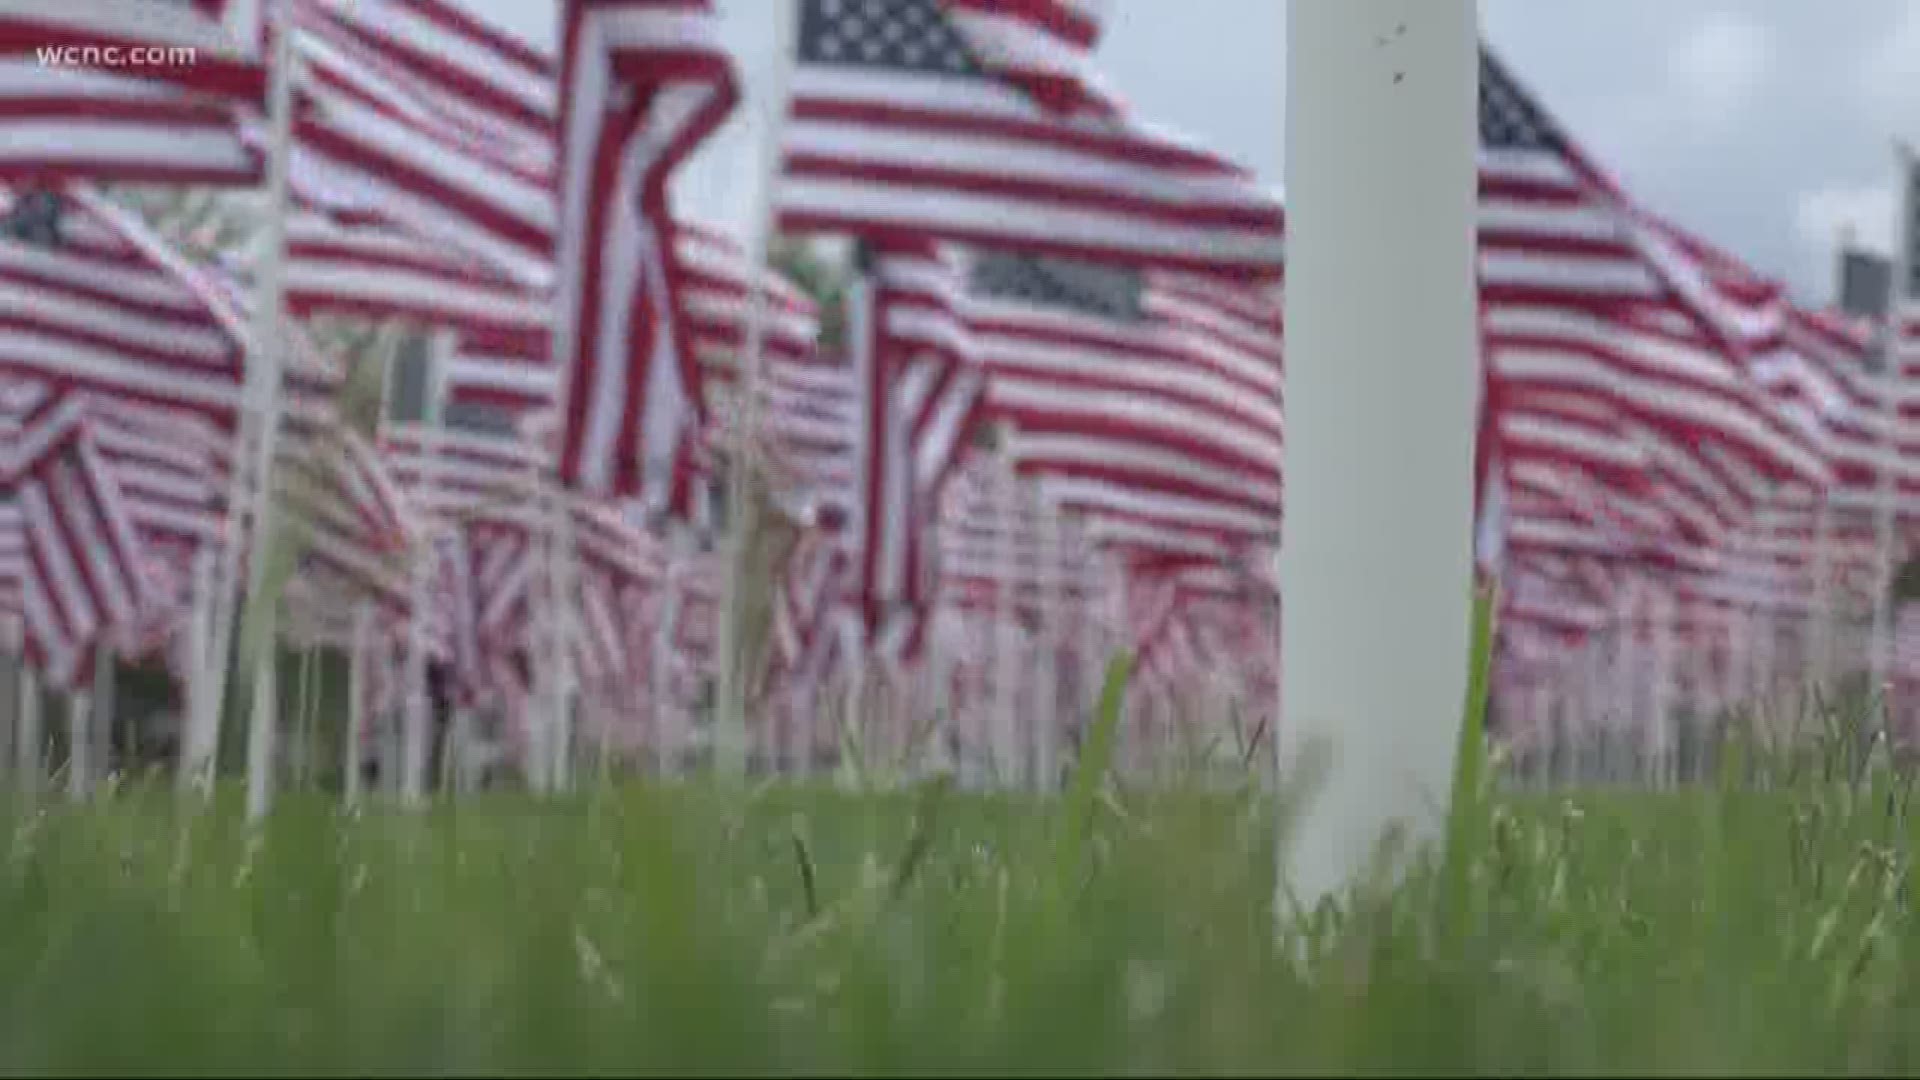 More than 40 volunteers set out Friday morning setting up the display at the Lowe's YMCA Field. Each flag represents a life and a story of bravery.